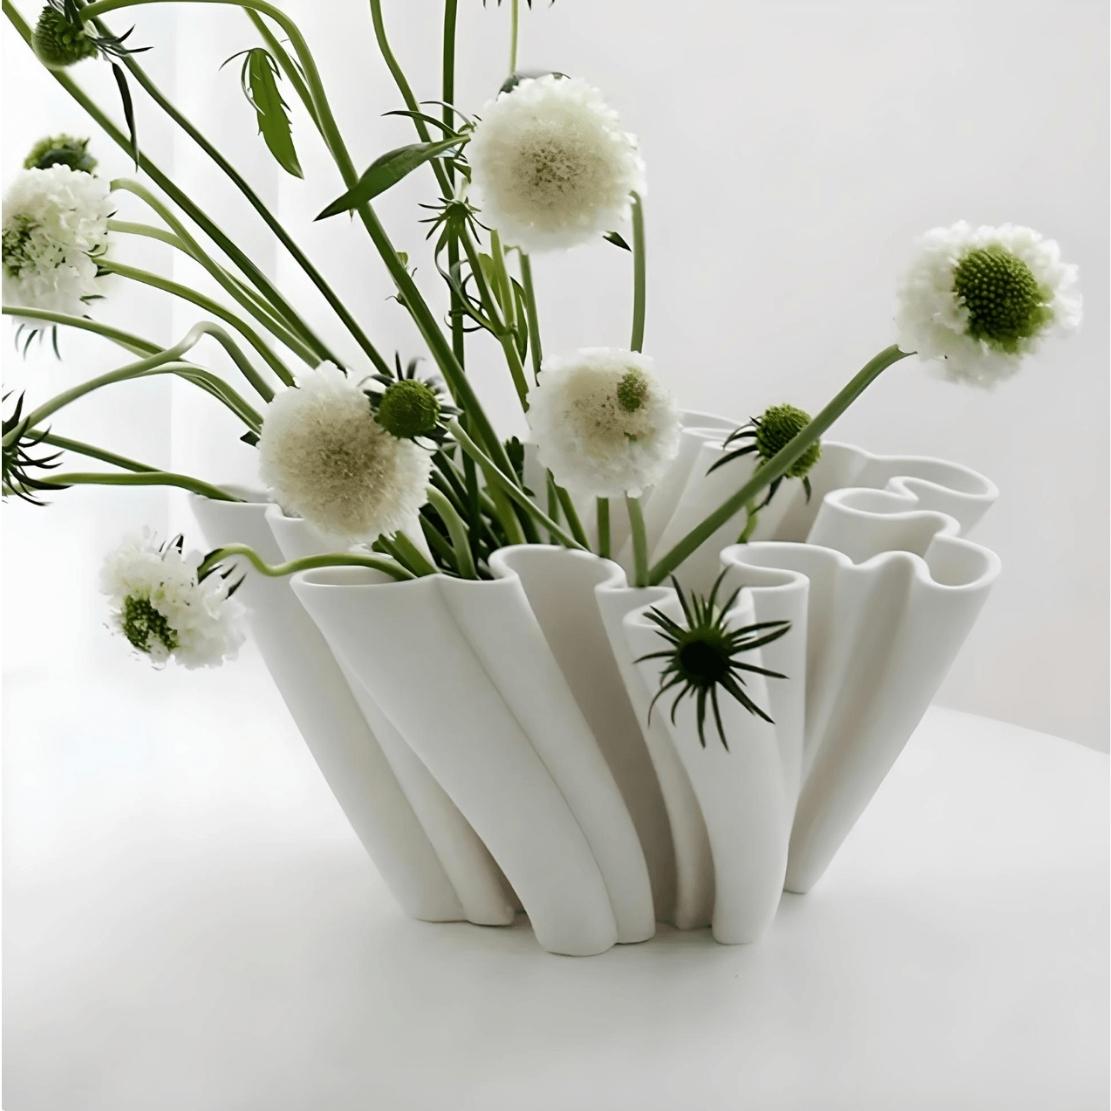 Large, white, wavy, ceramic ornament bowl with flowers